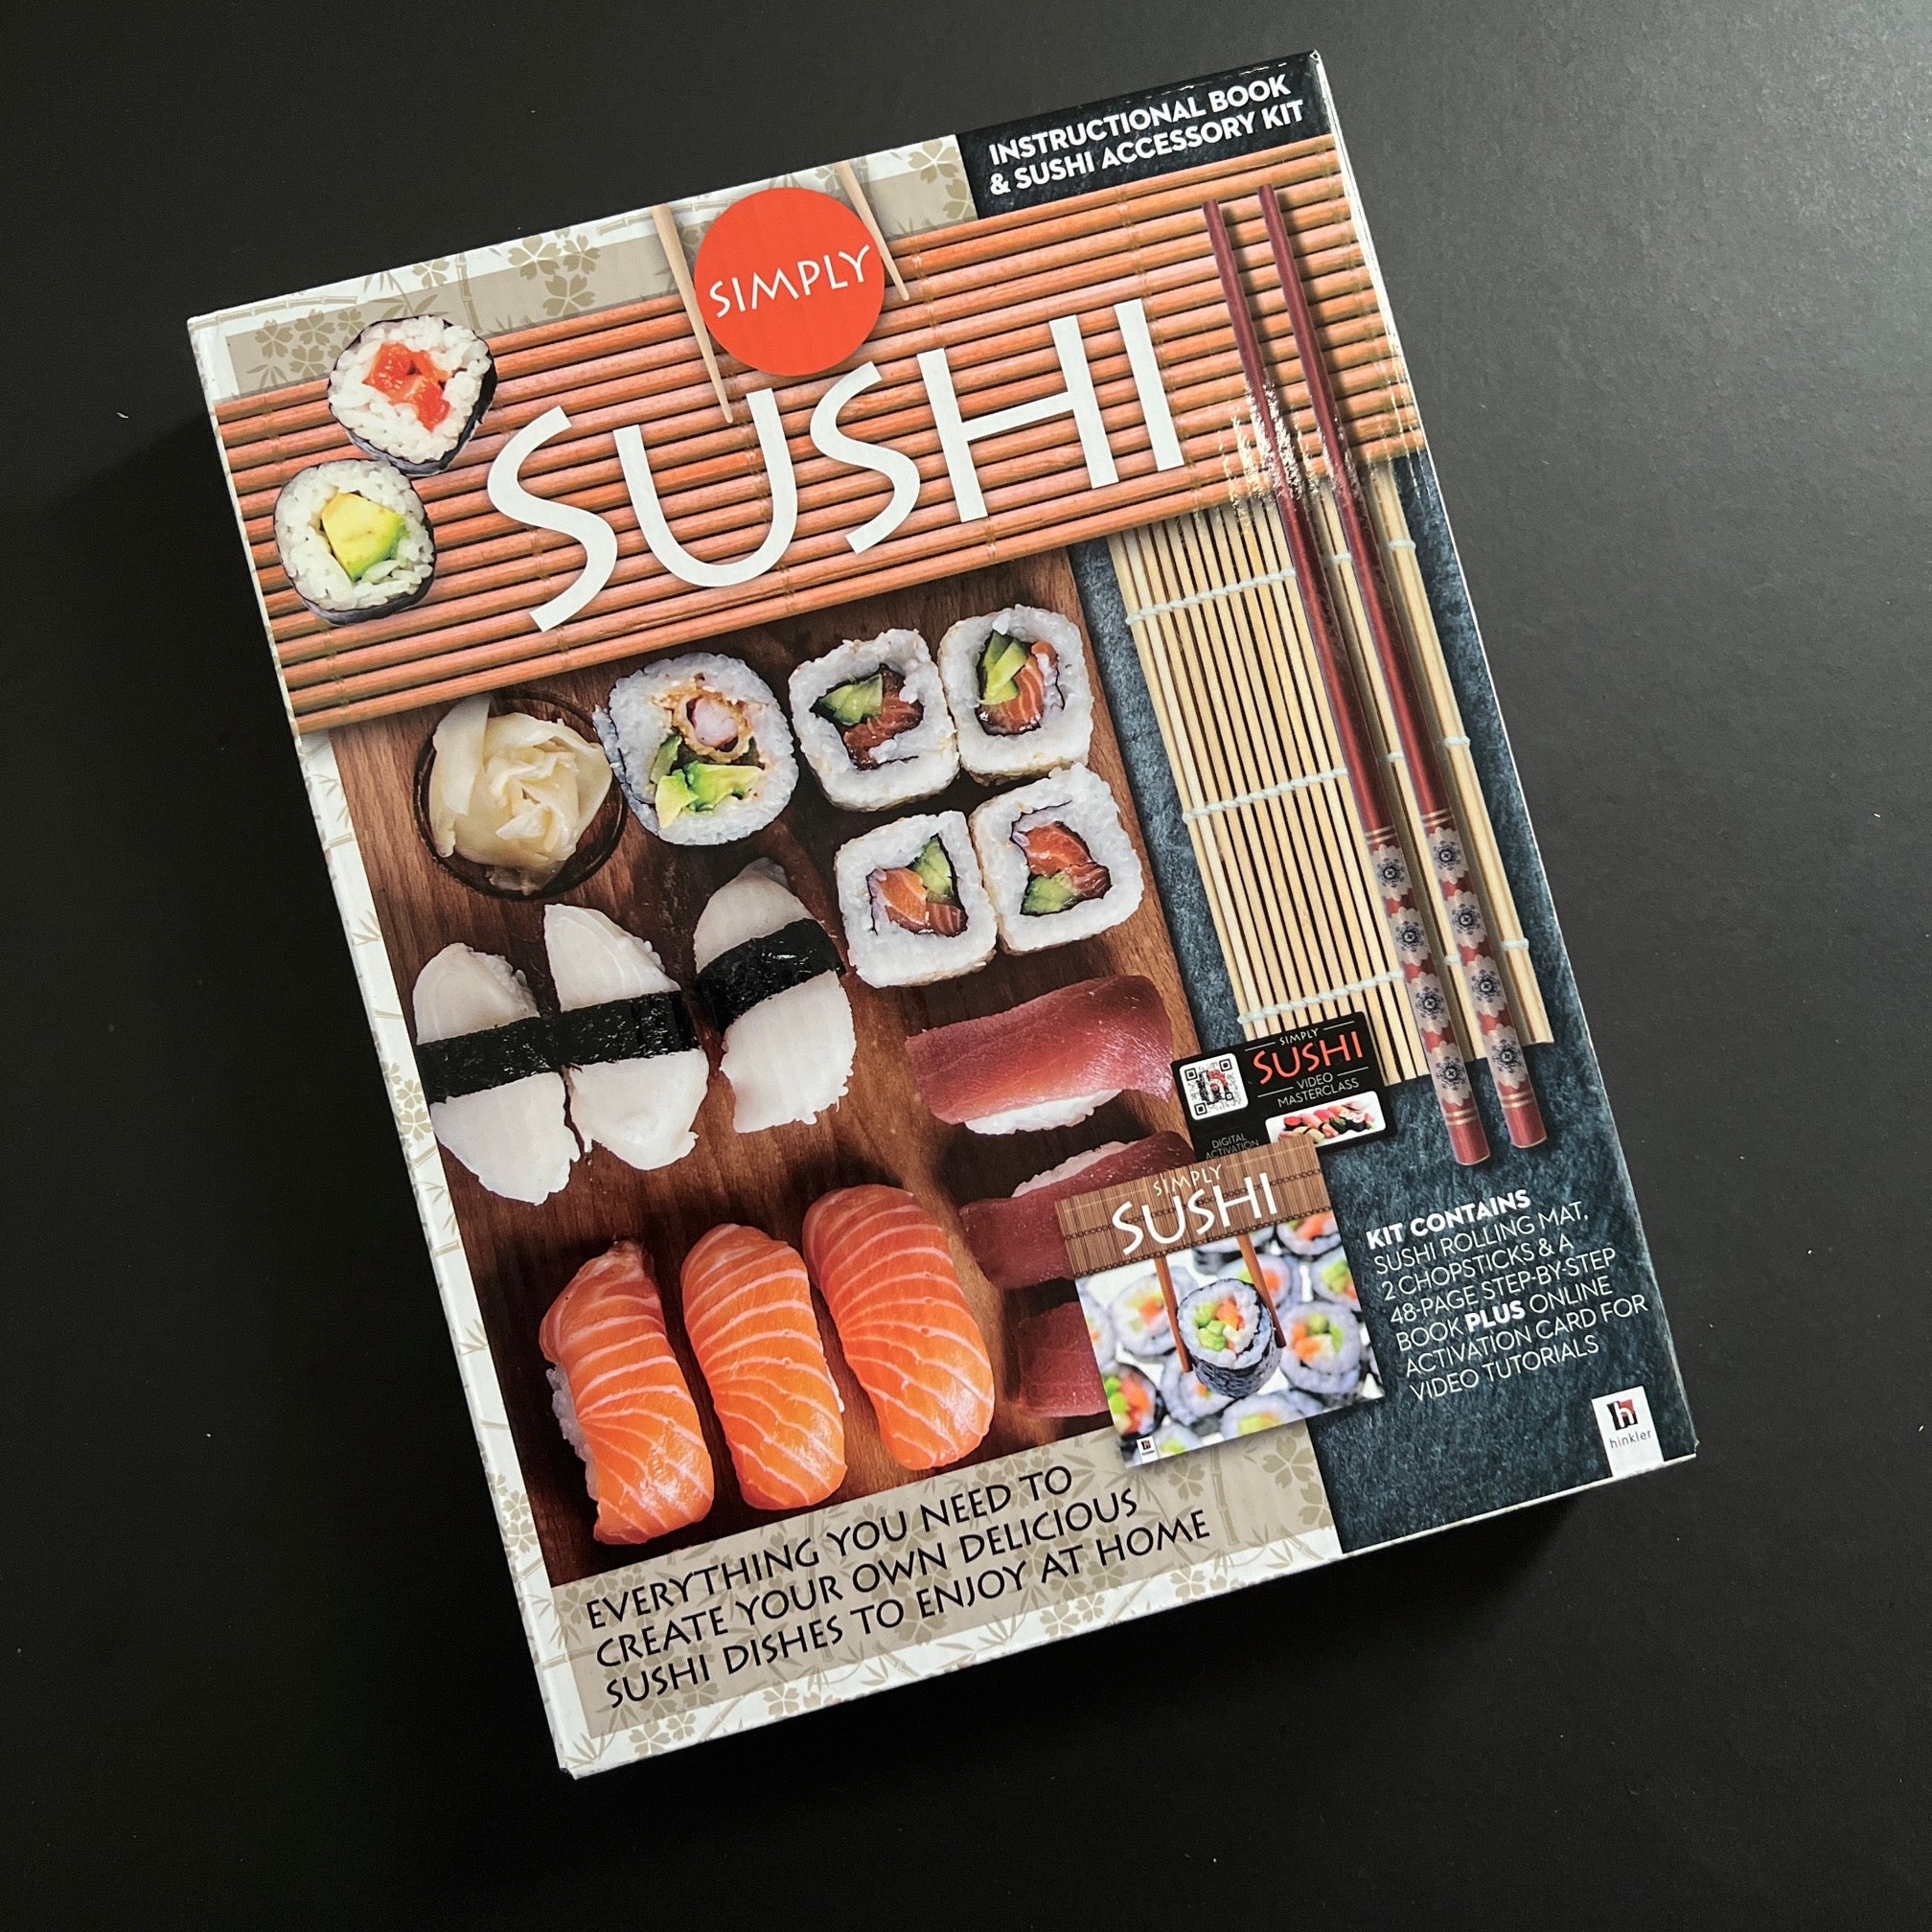 SpiceBox Introduction to Sushi Kit